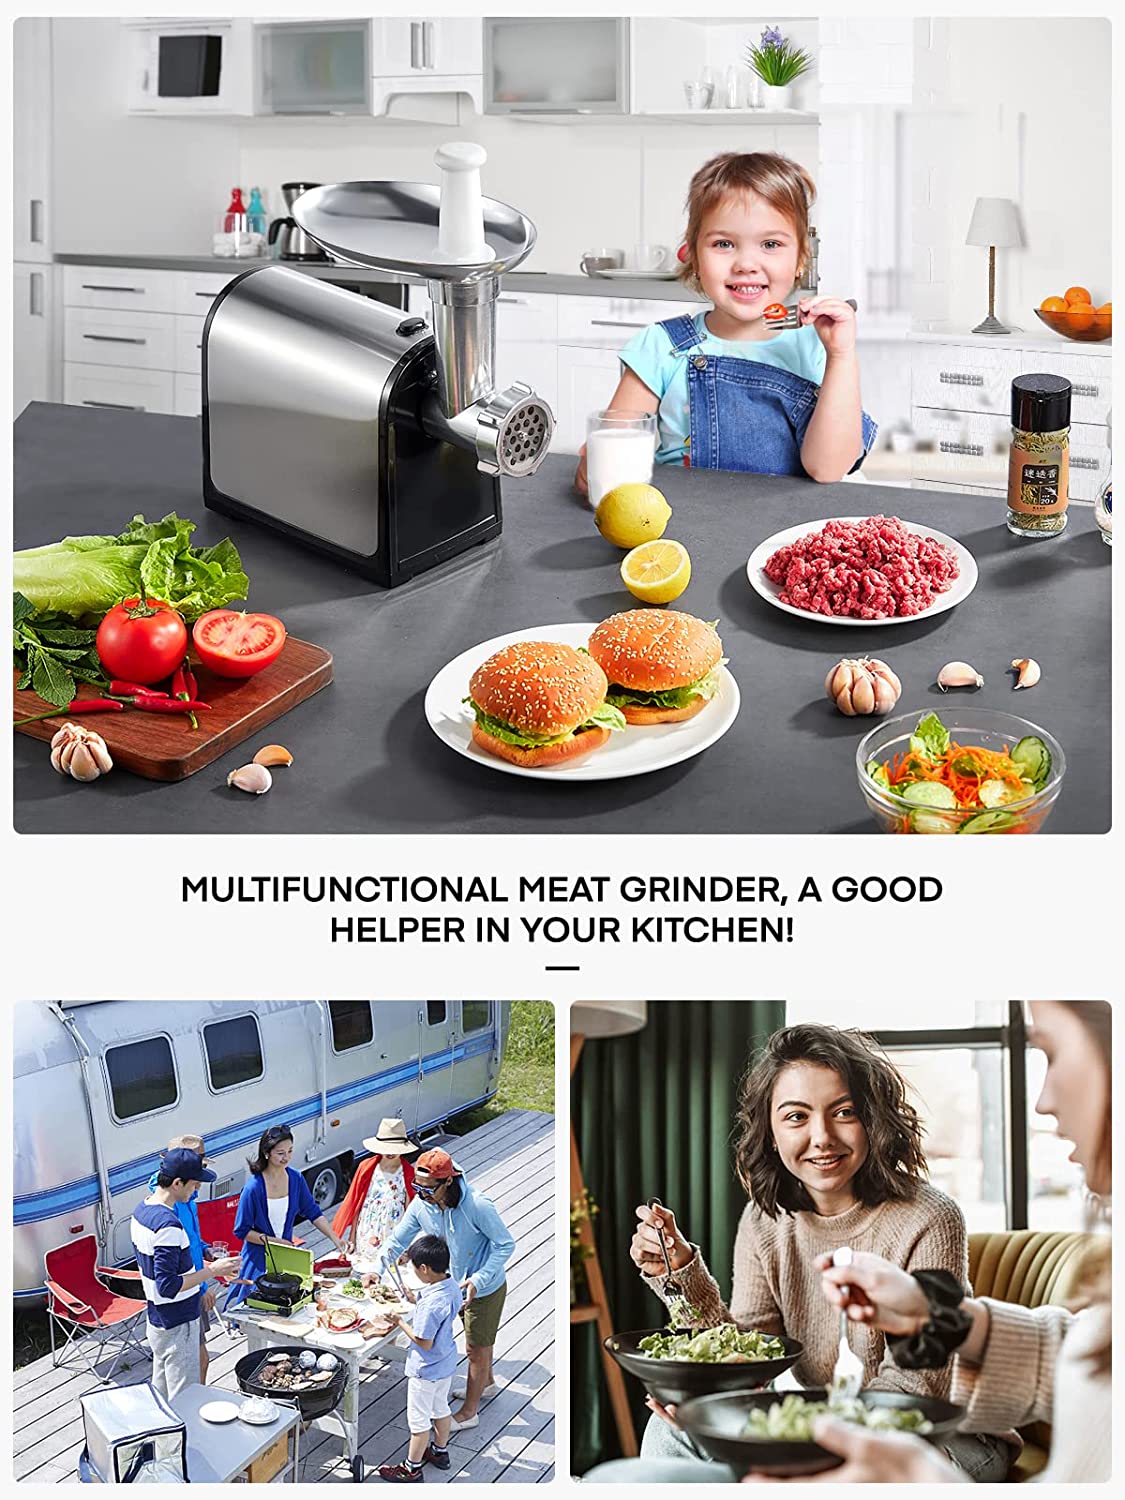 All-in-One Grinder: Multifunctional Stainless Steel Meat and